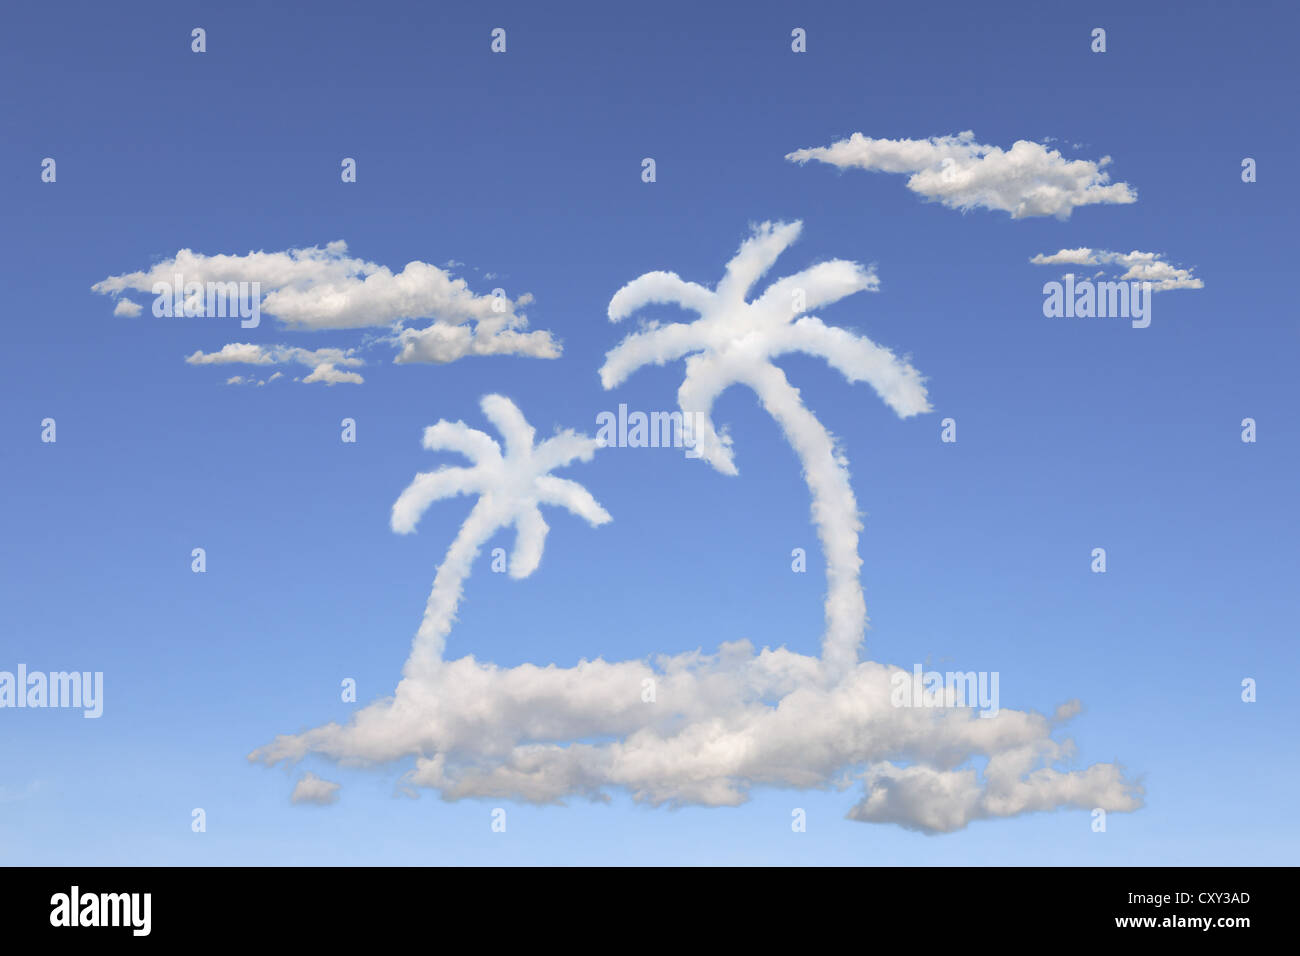 Cloud formations in the shape of an island with palm trees, illustration Stock Photo